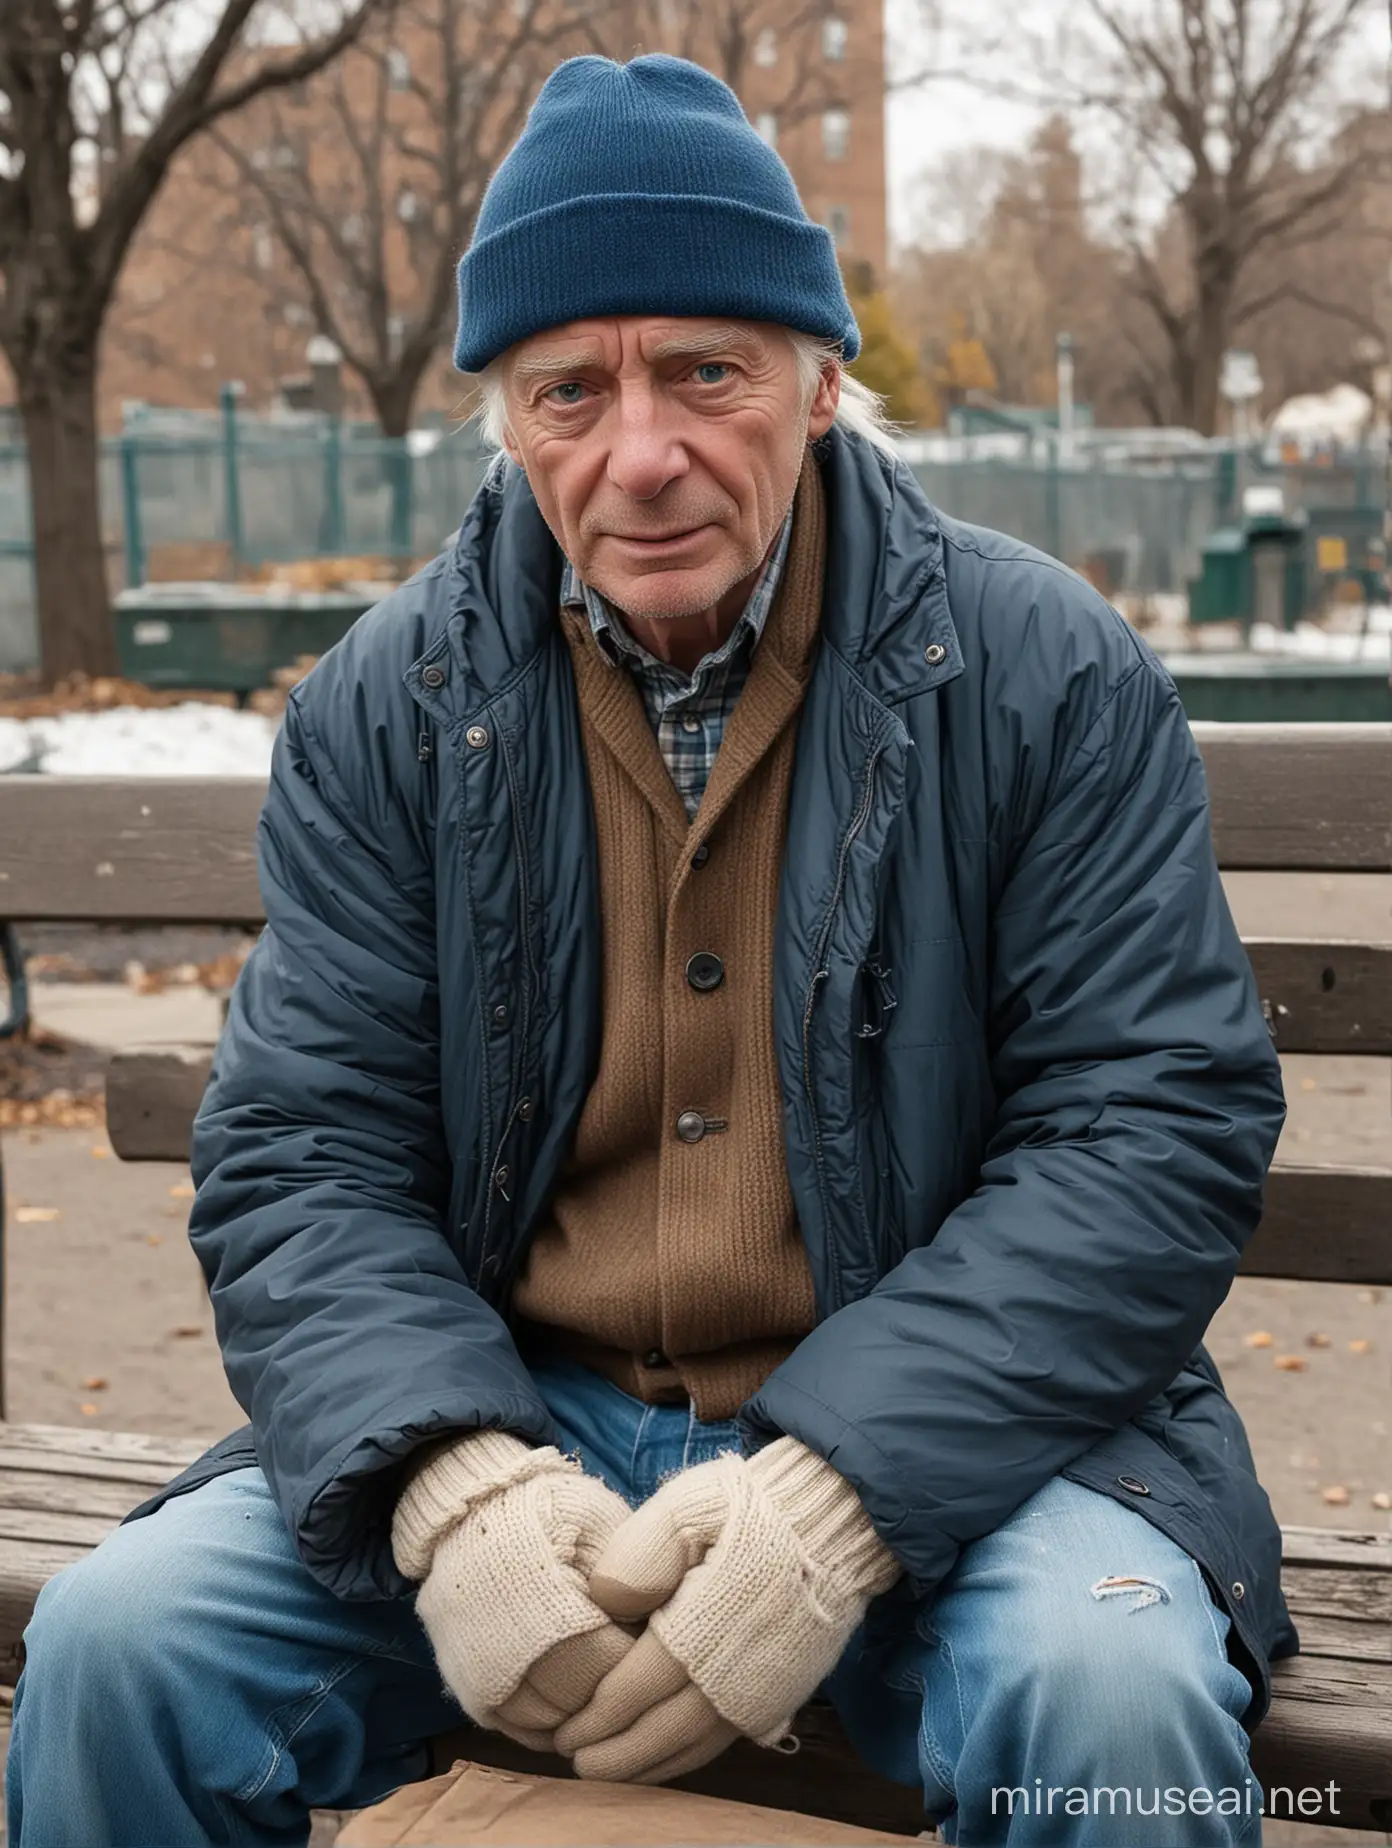 60 yo man, homeless, white hair, white stabble, wrinkles, sick skin, blue eyes old outfit, mittens, ripped cap, bench, park